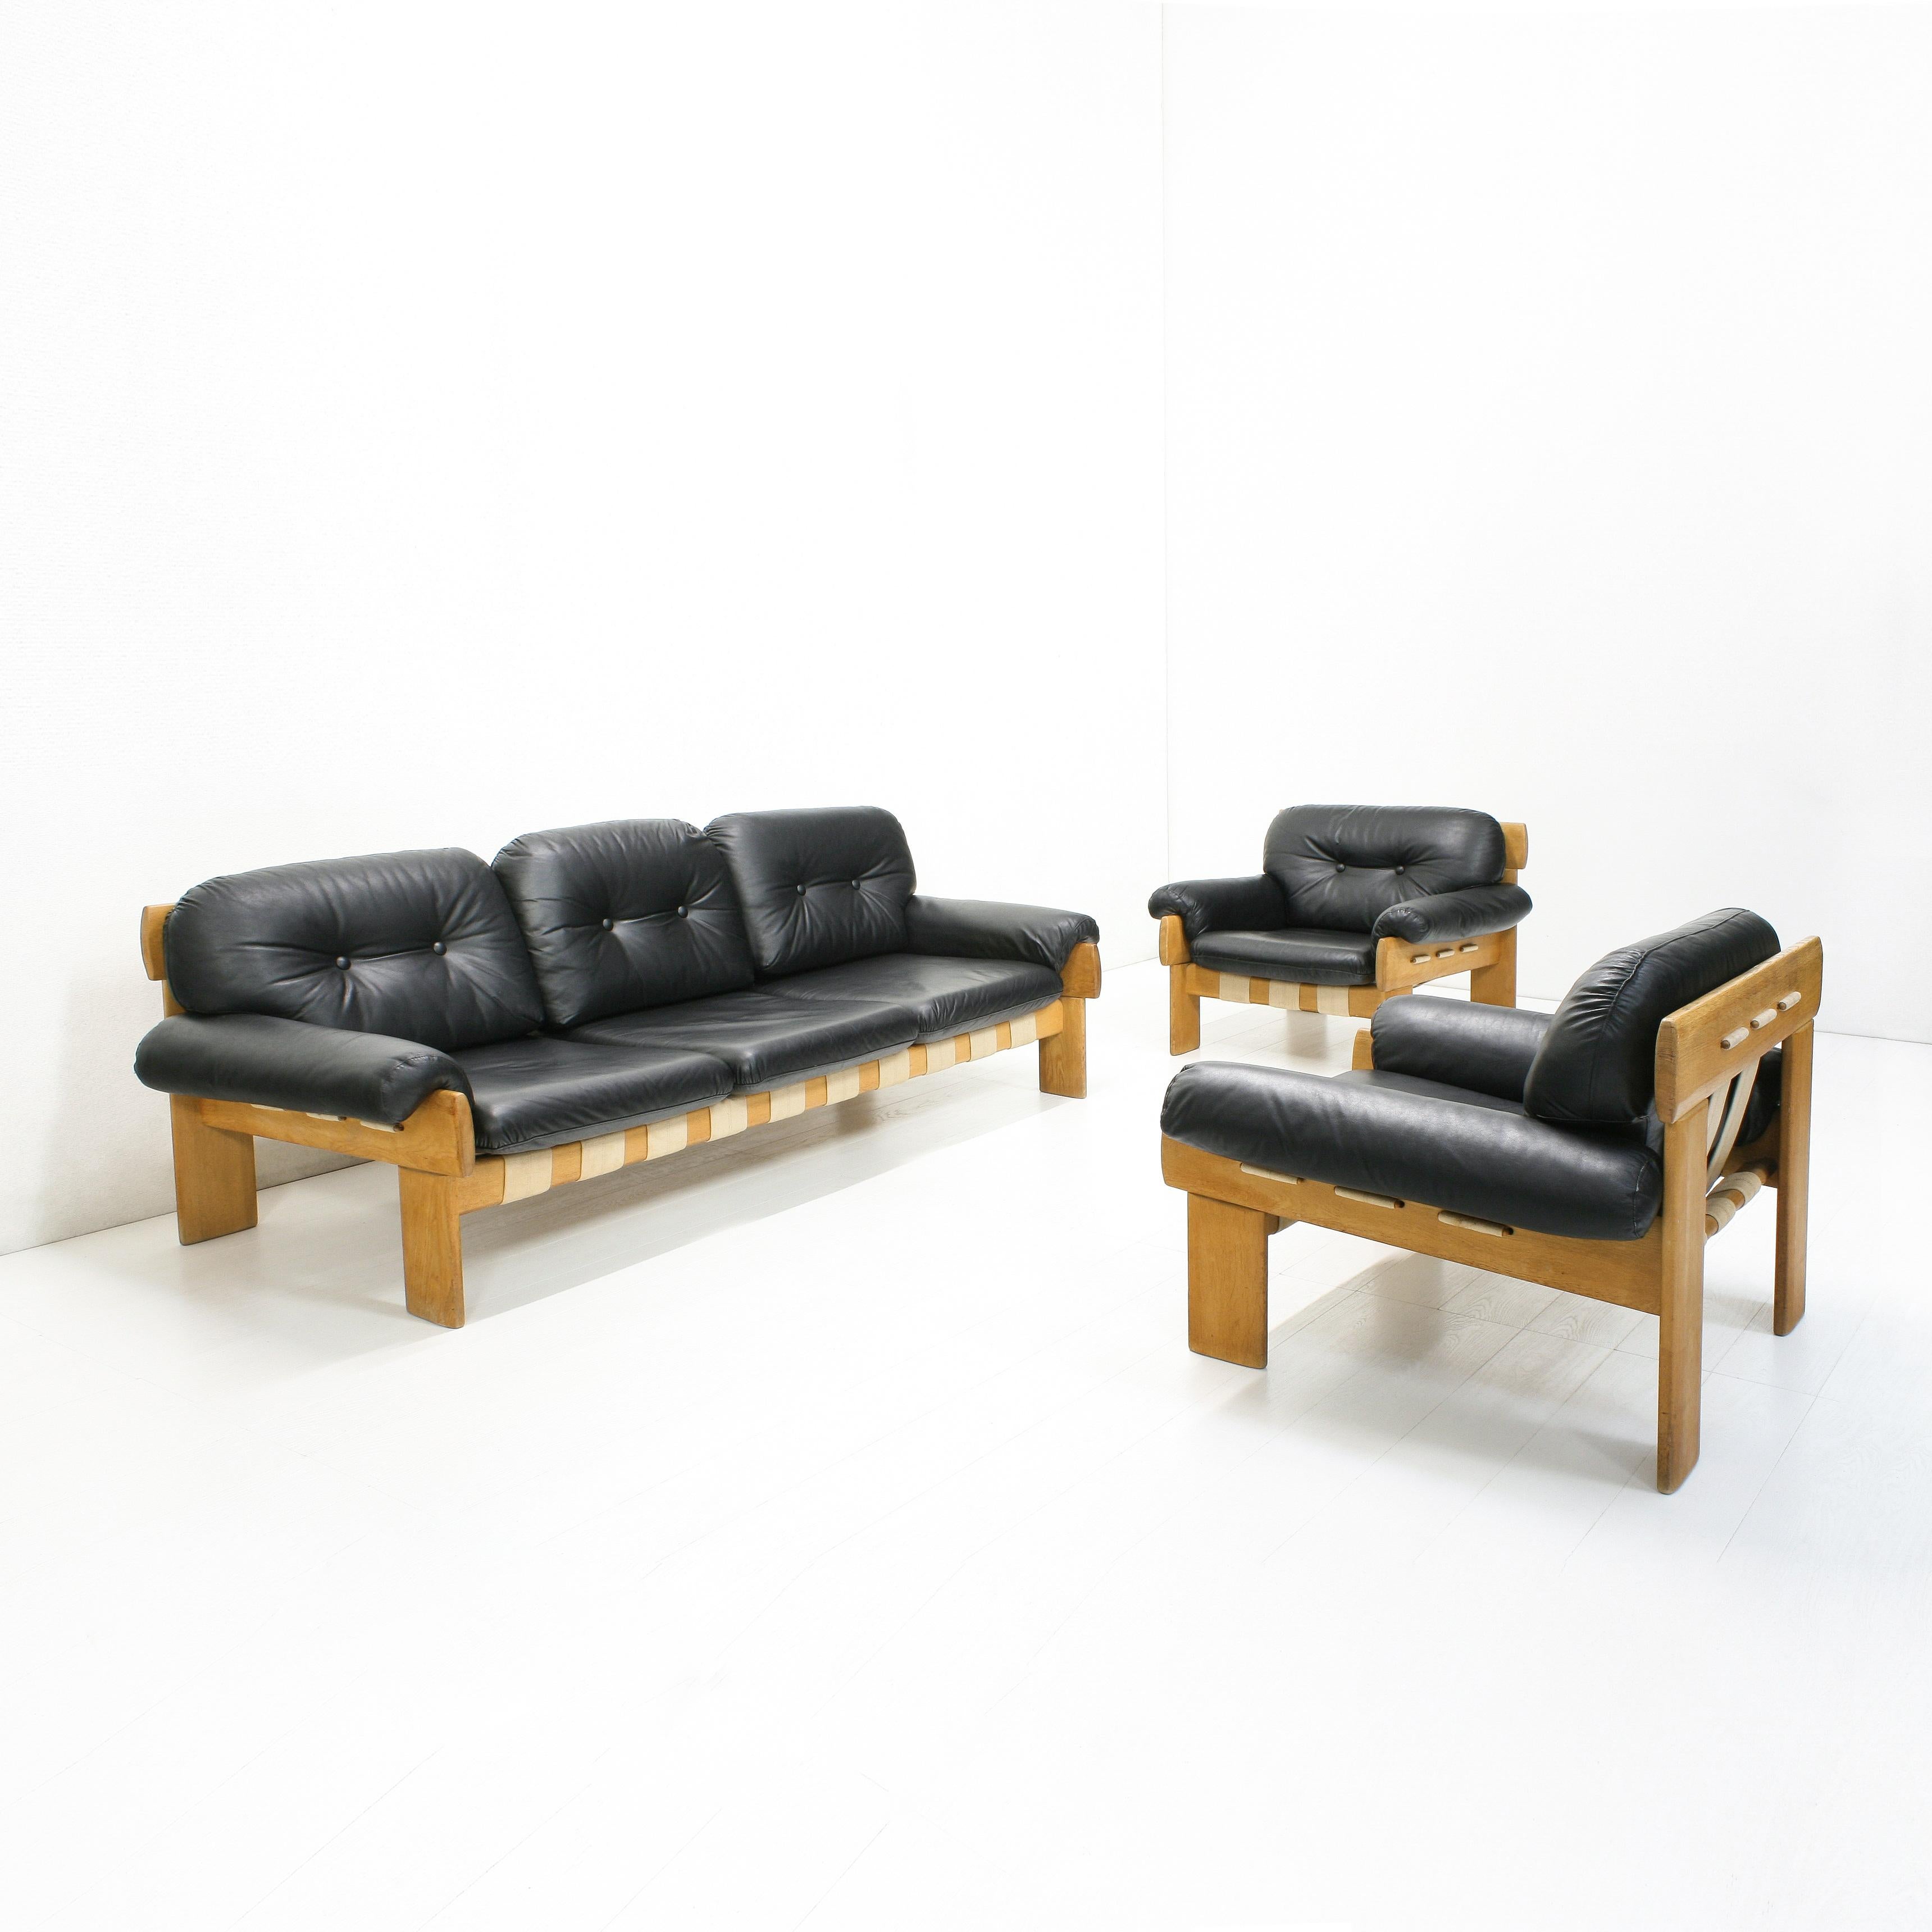 Mid-Century Modern Oak and Leather Africa Armchairs and Sofa by Esko Pajamies for Asko Oy, 1970s For Sale